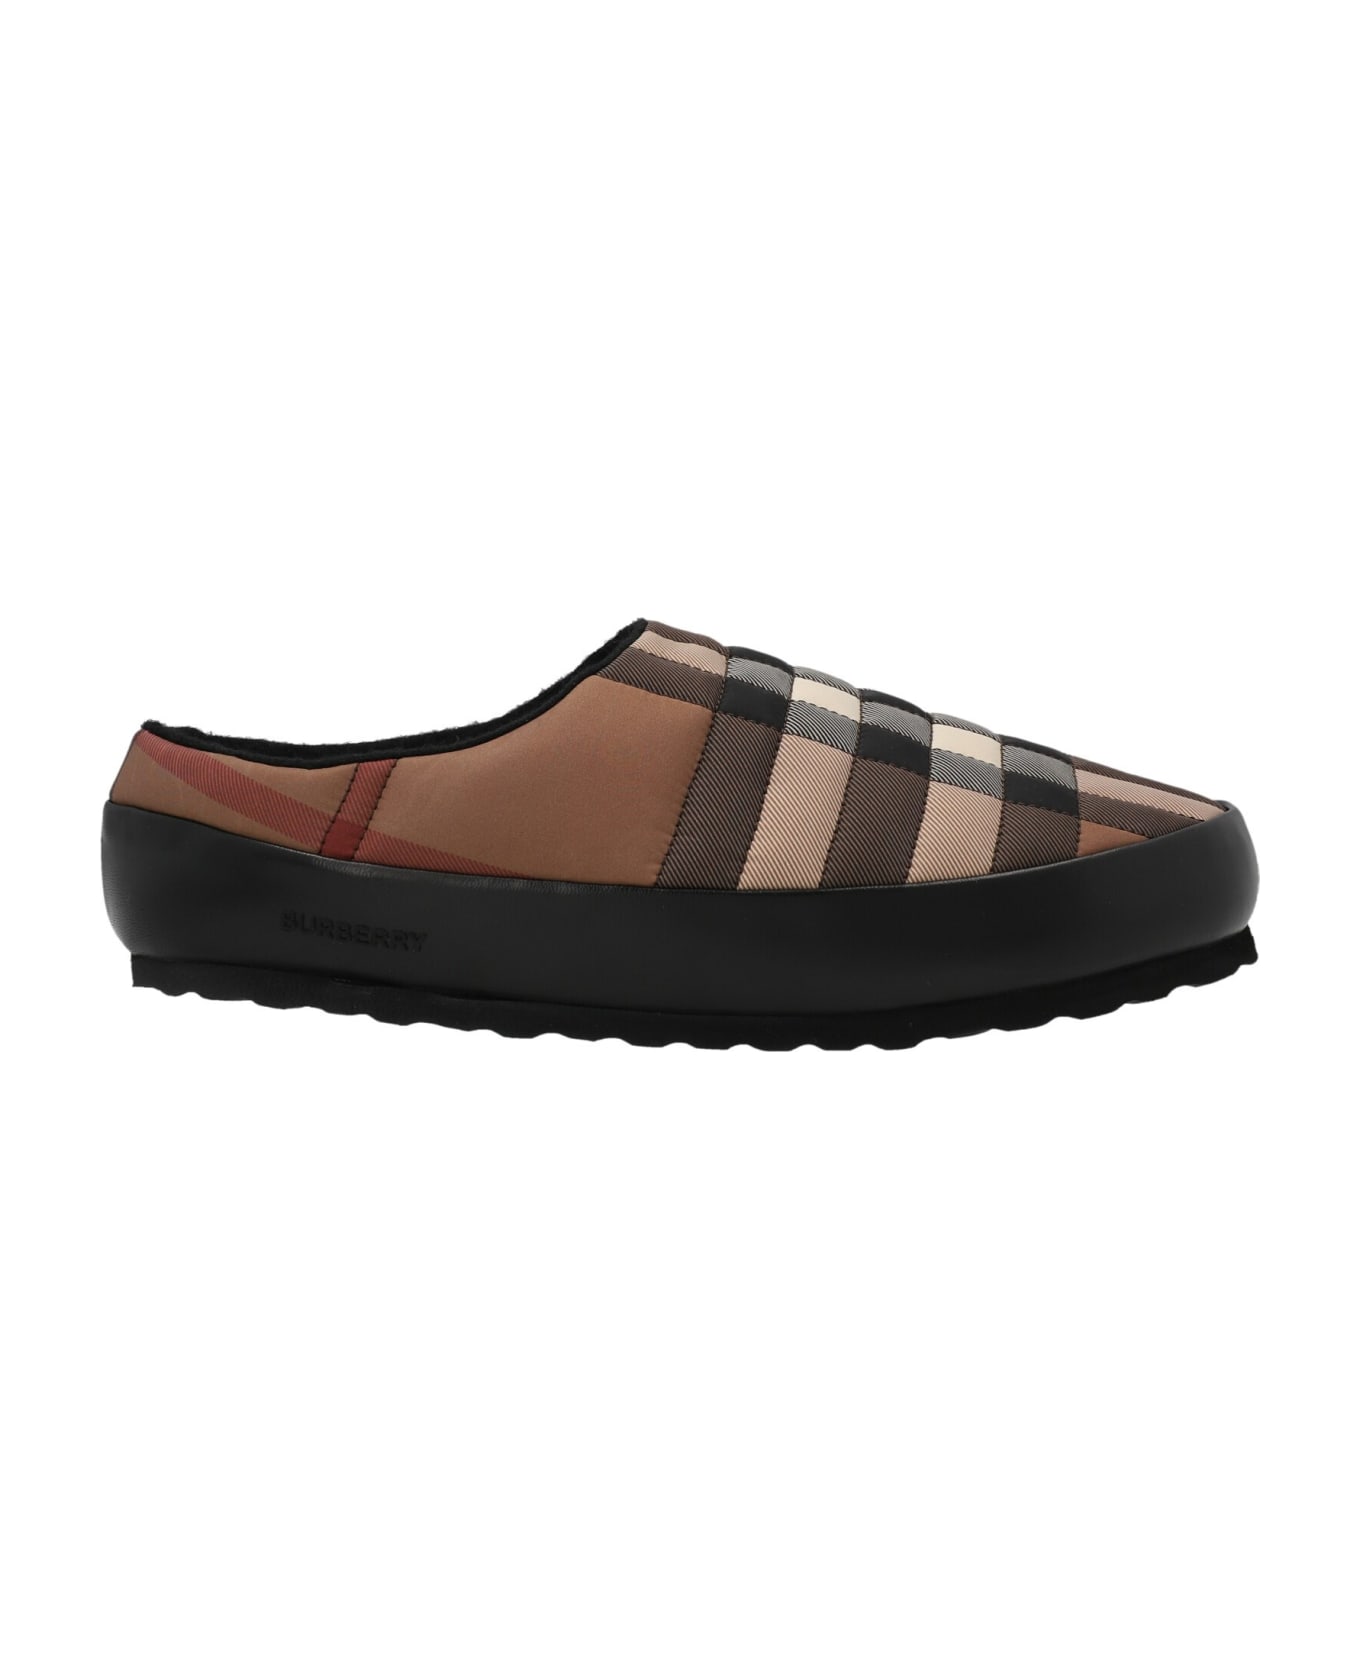 Burberry Shirt Slippers - Brown